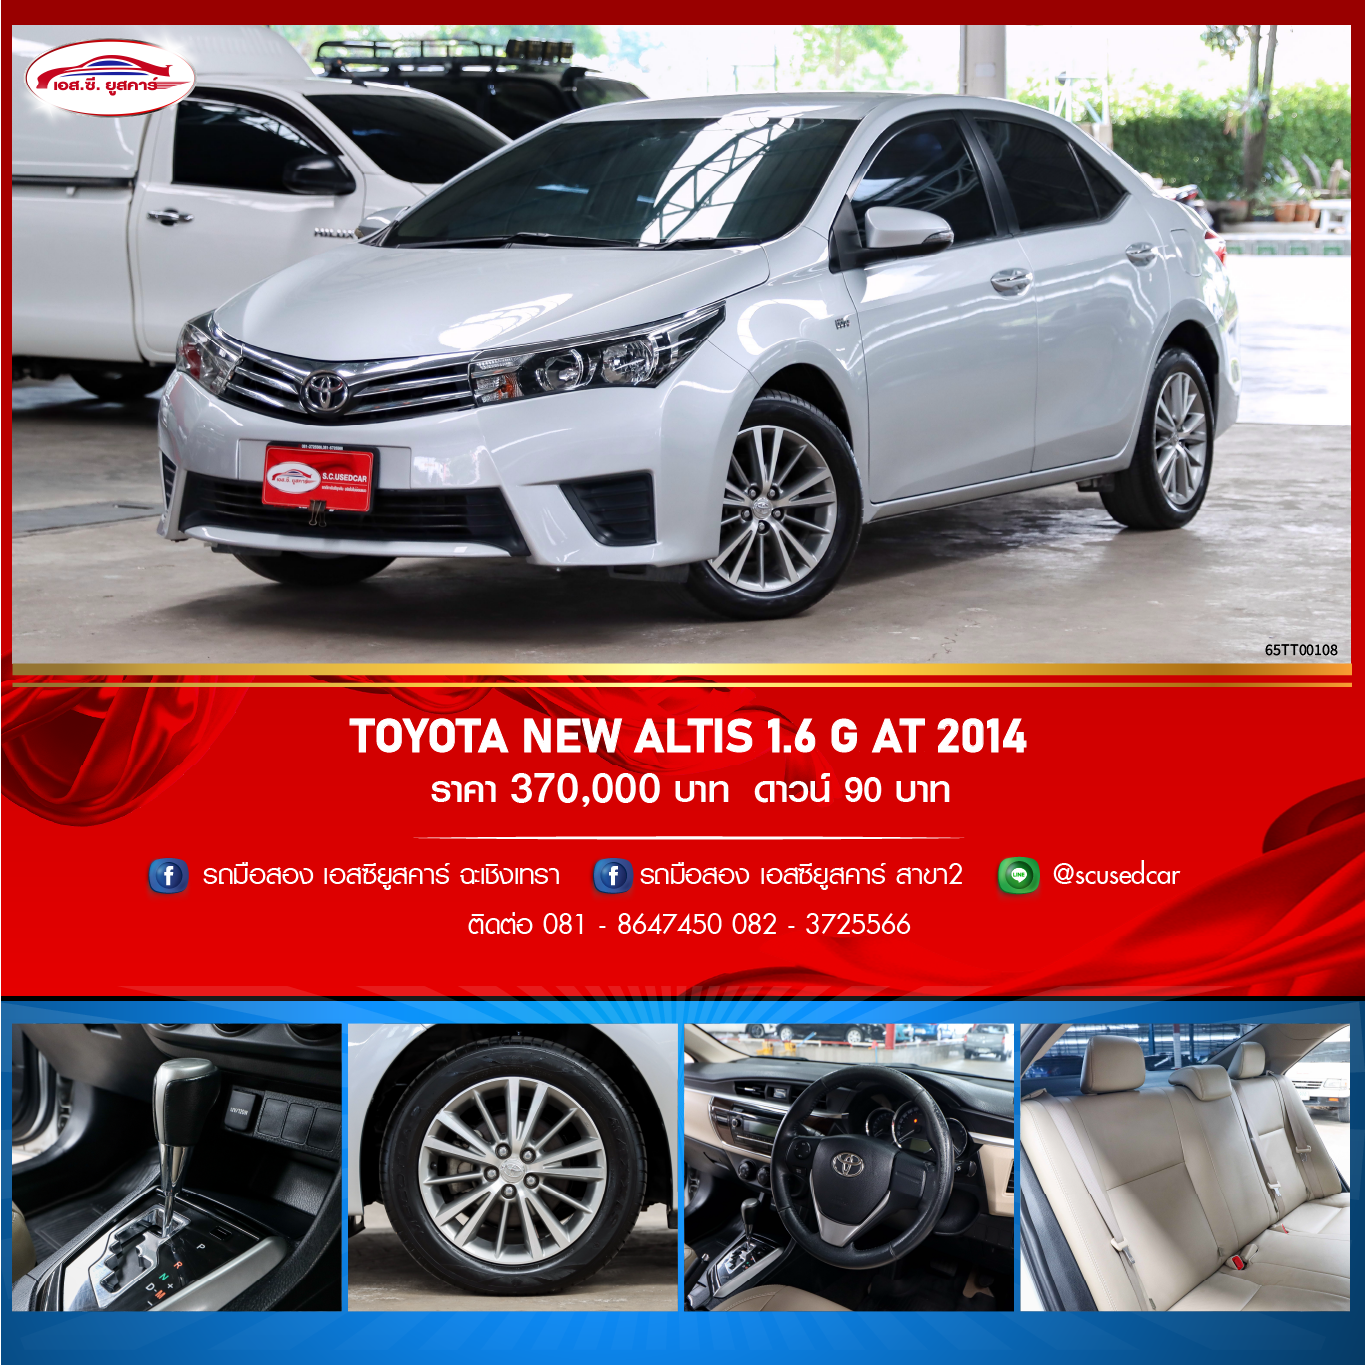 TOYOTA NEW ALTIS 1.6 G AT 2014